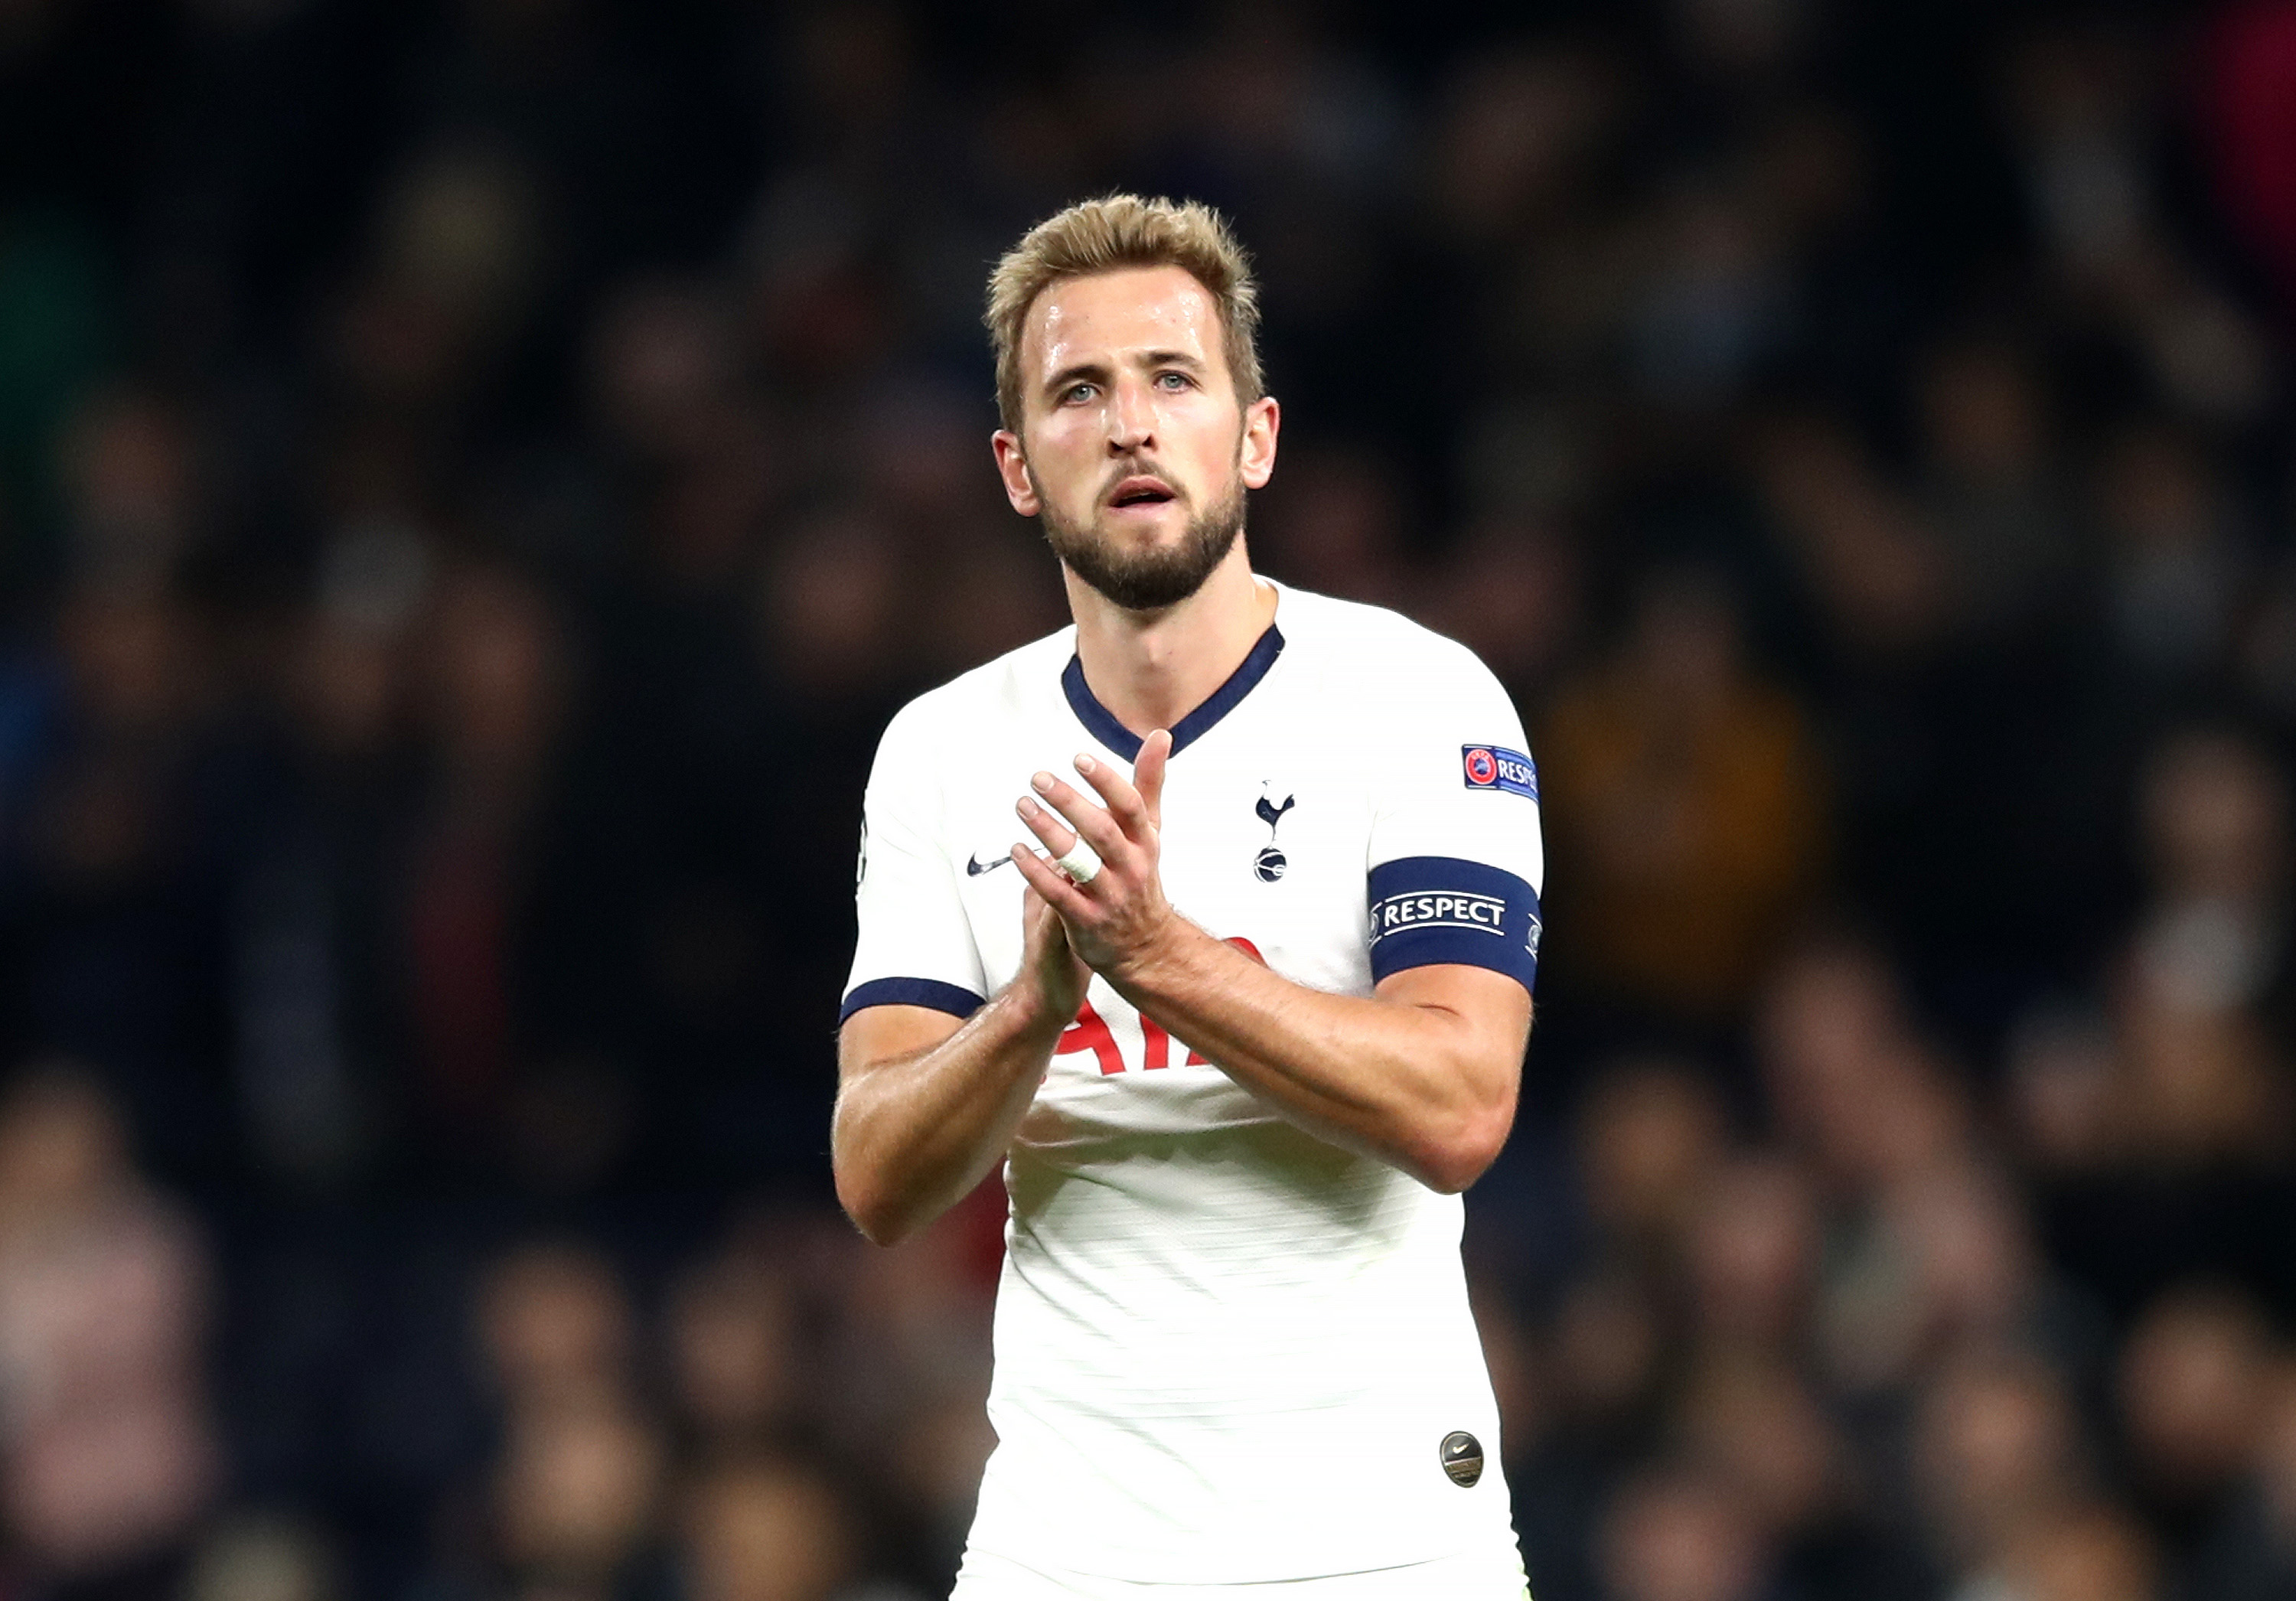 From ace goalscorer to star playmaker, Harry Kane can do it all (Photo by Bryn Lennon/Getty Images)